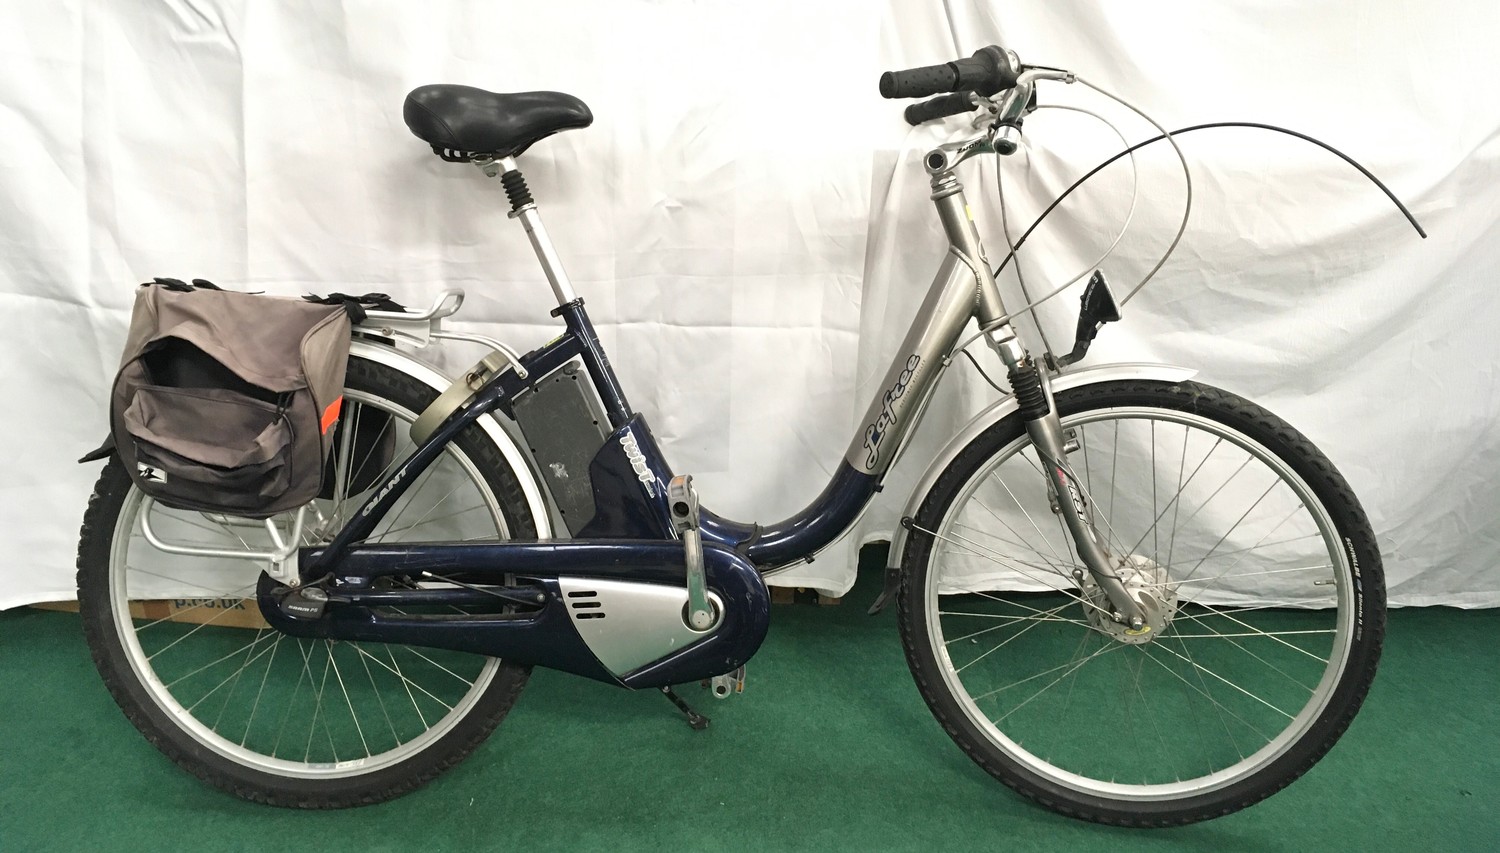 Giant LaFree twist comfort electric bike blue and silver (REF 4).